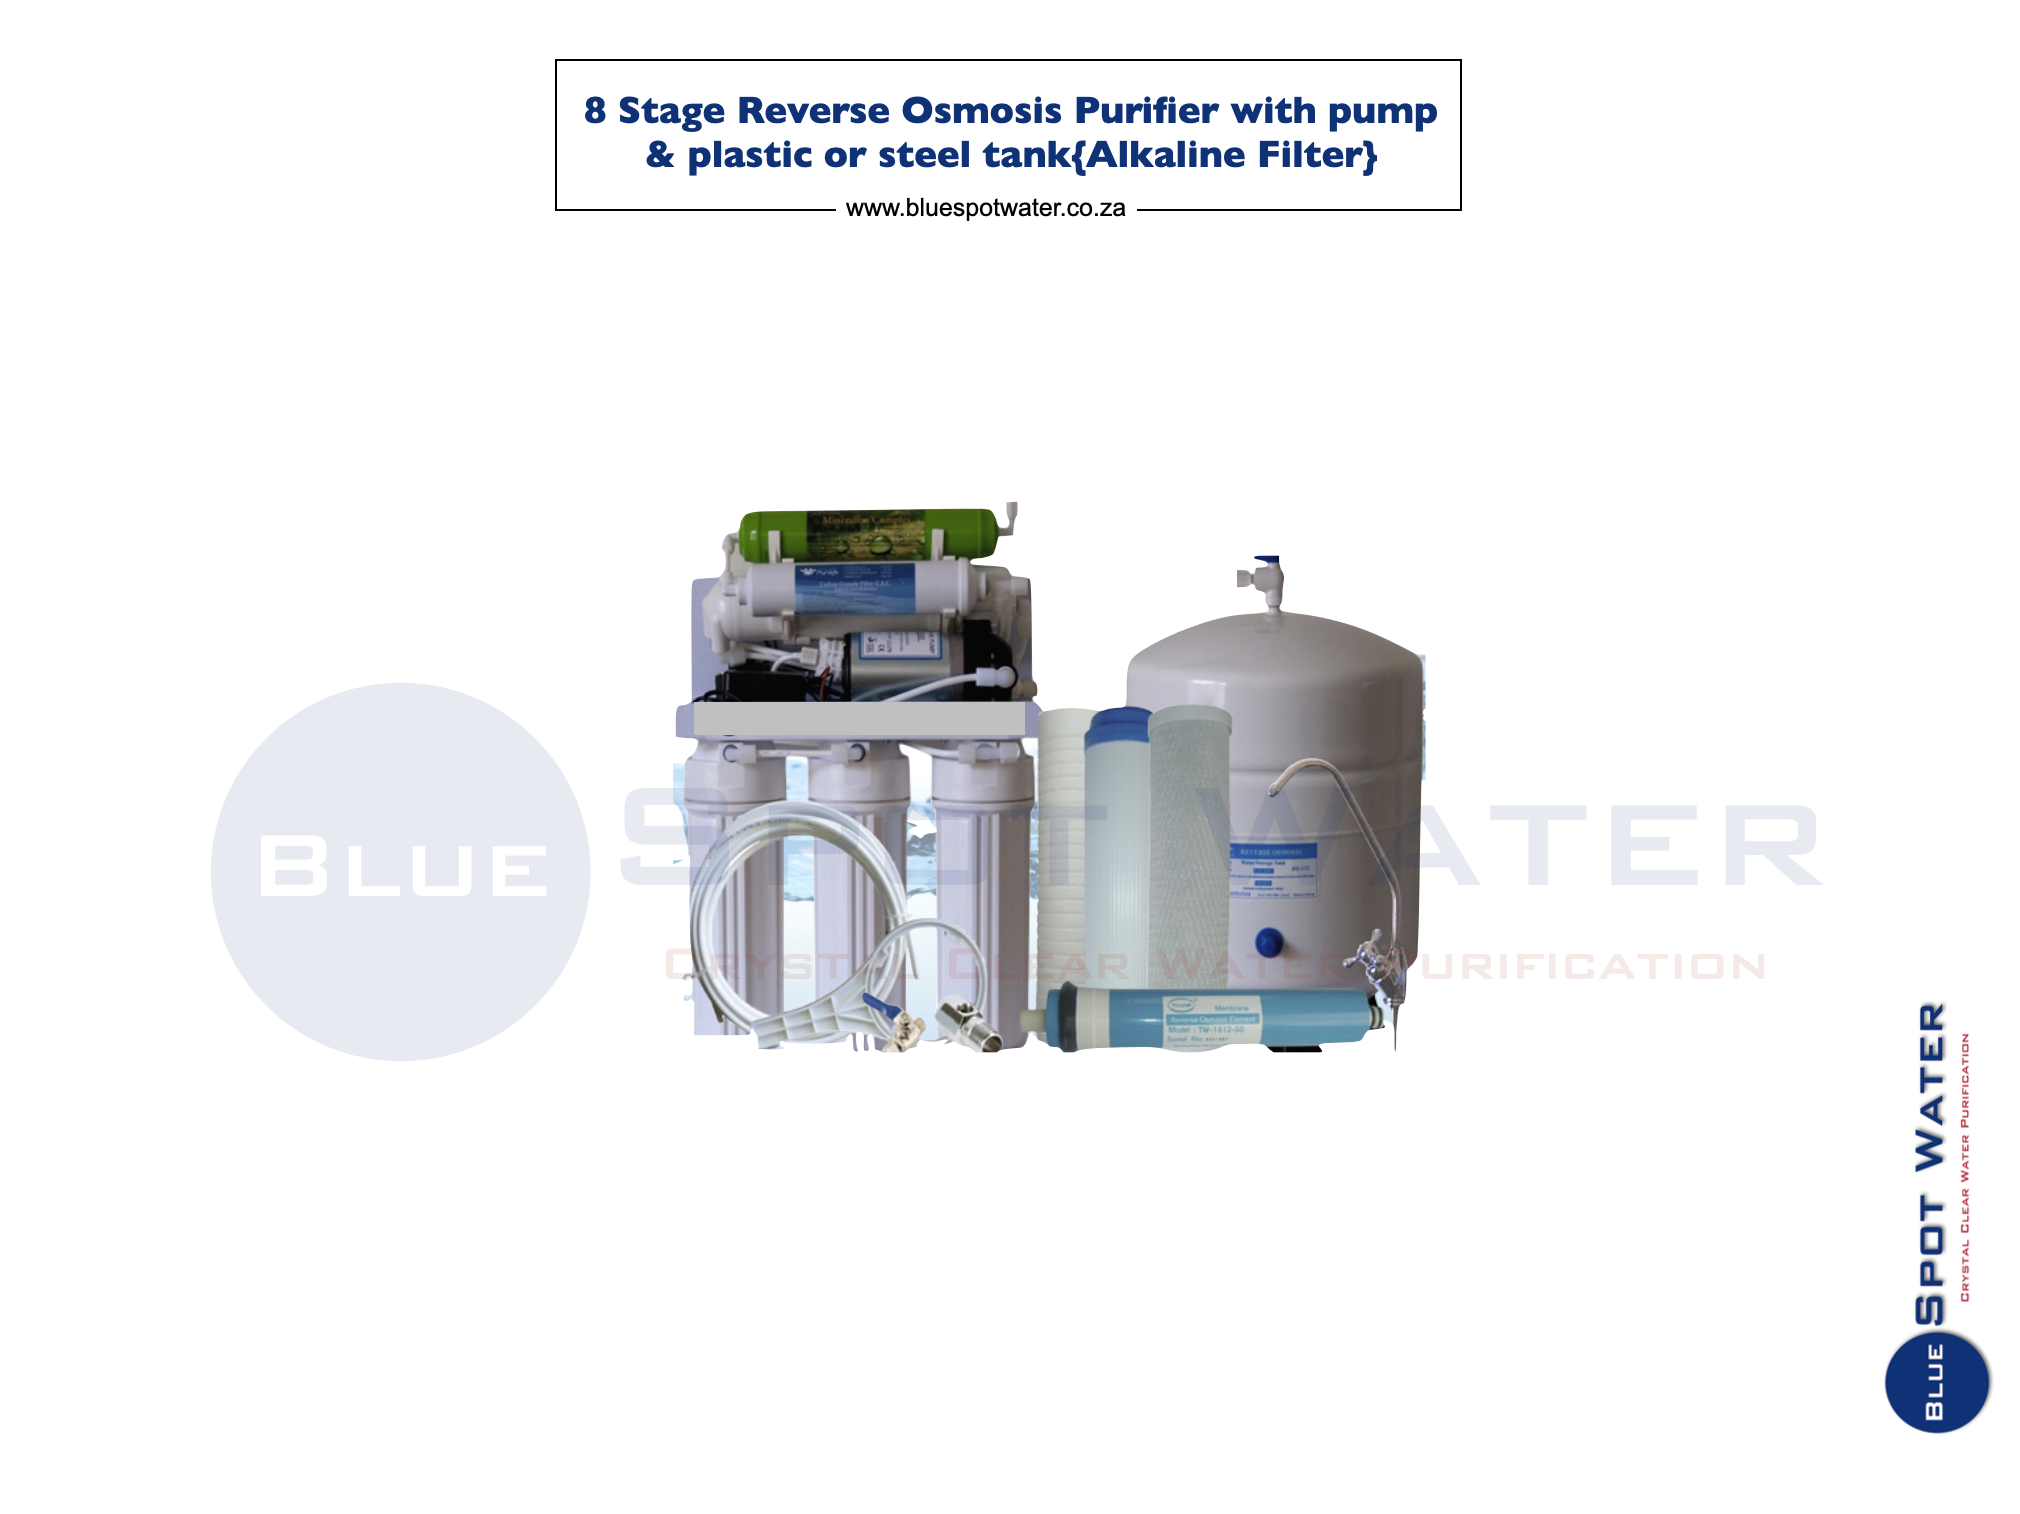 8-stage-reverse-osmosis-purifier-alkaline-filter-with-pump-steel-or-plastic-tank